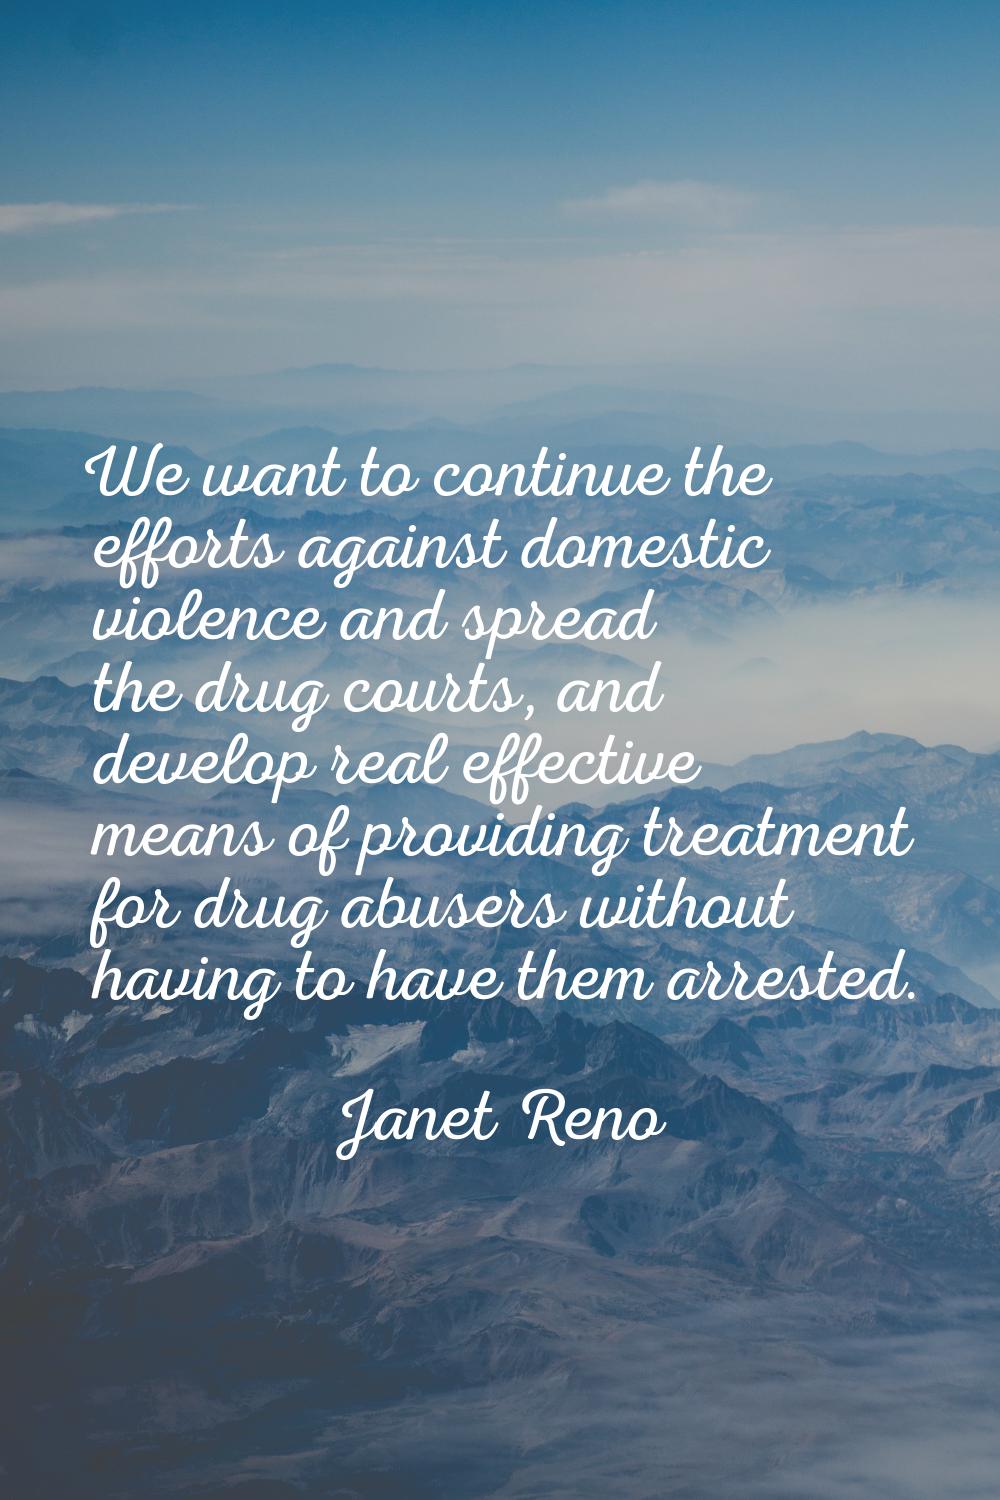 We want to continue the efforts against domestic violence and spread the drug courts, and develop r